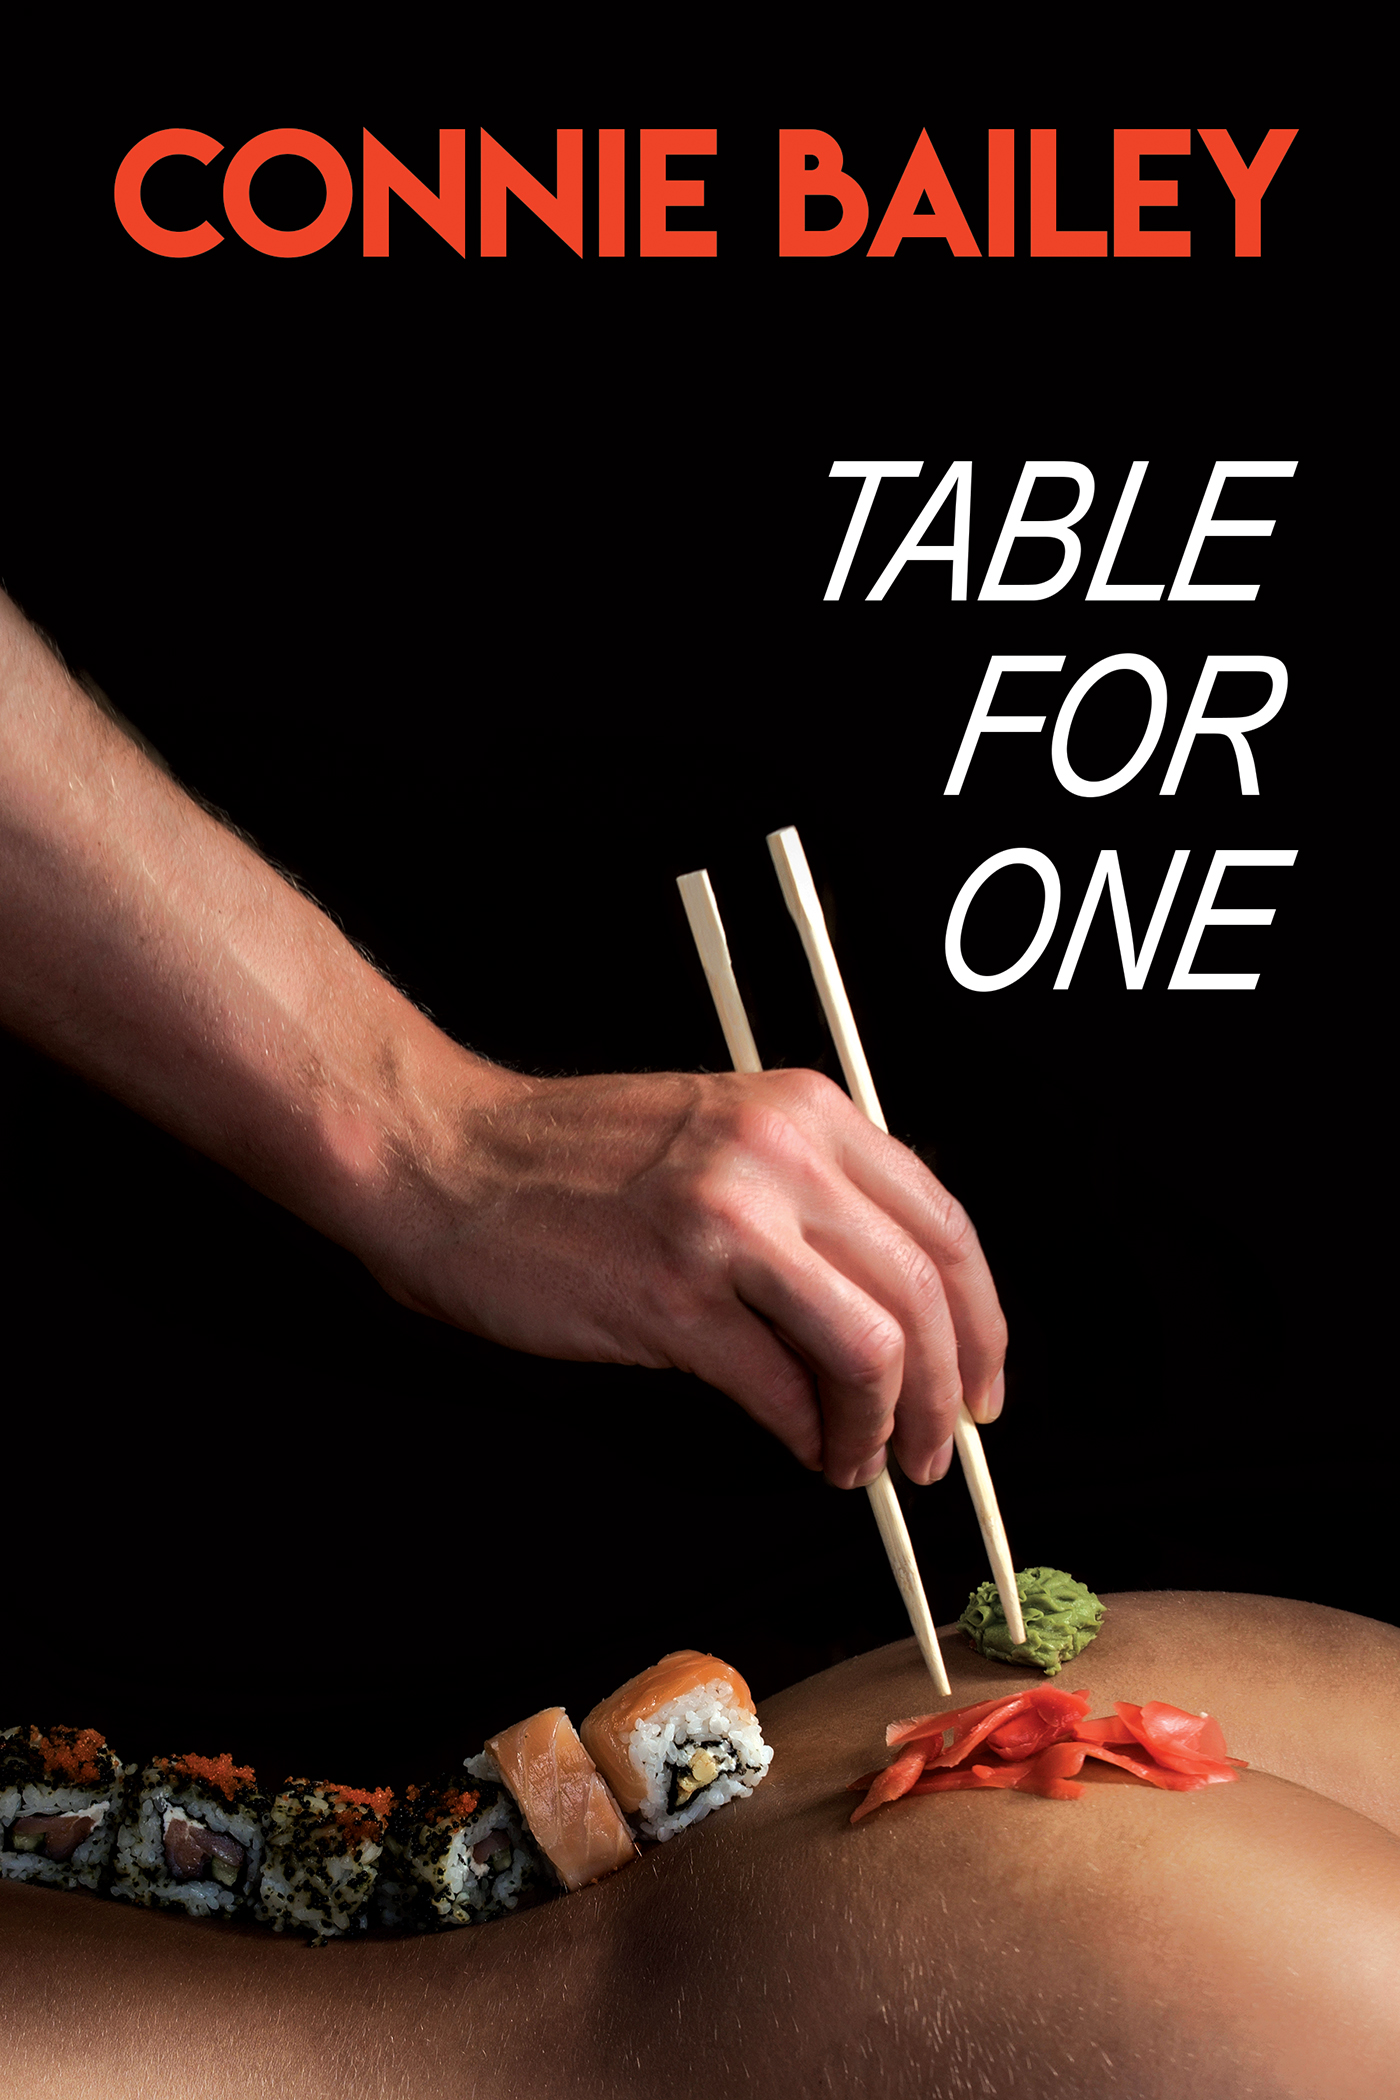 This image is the cover for the book Table for One